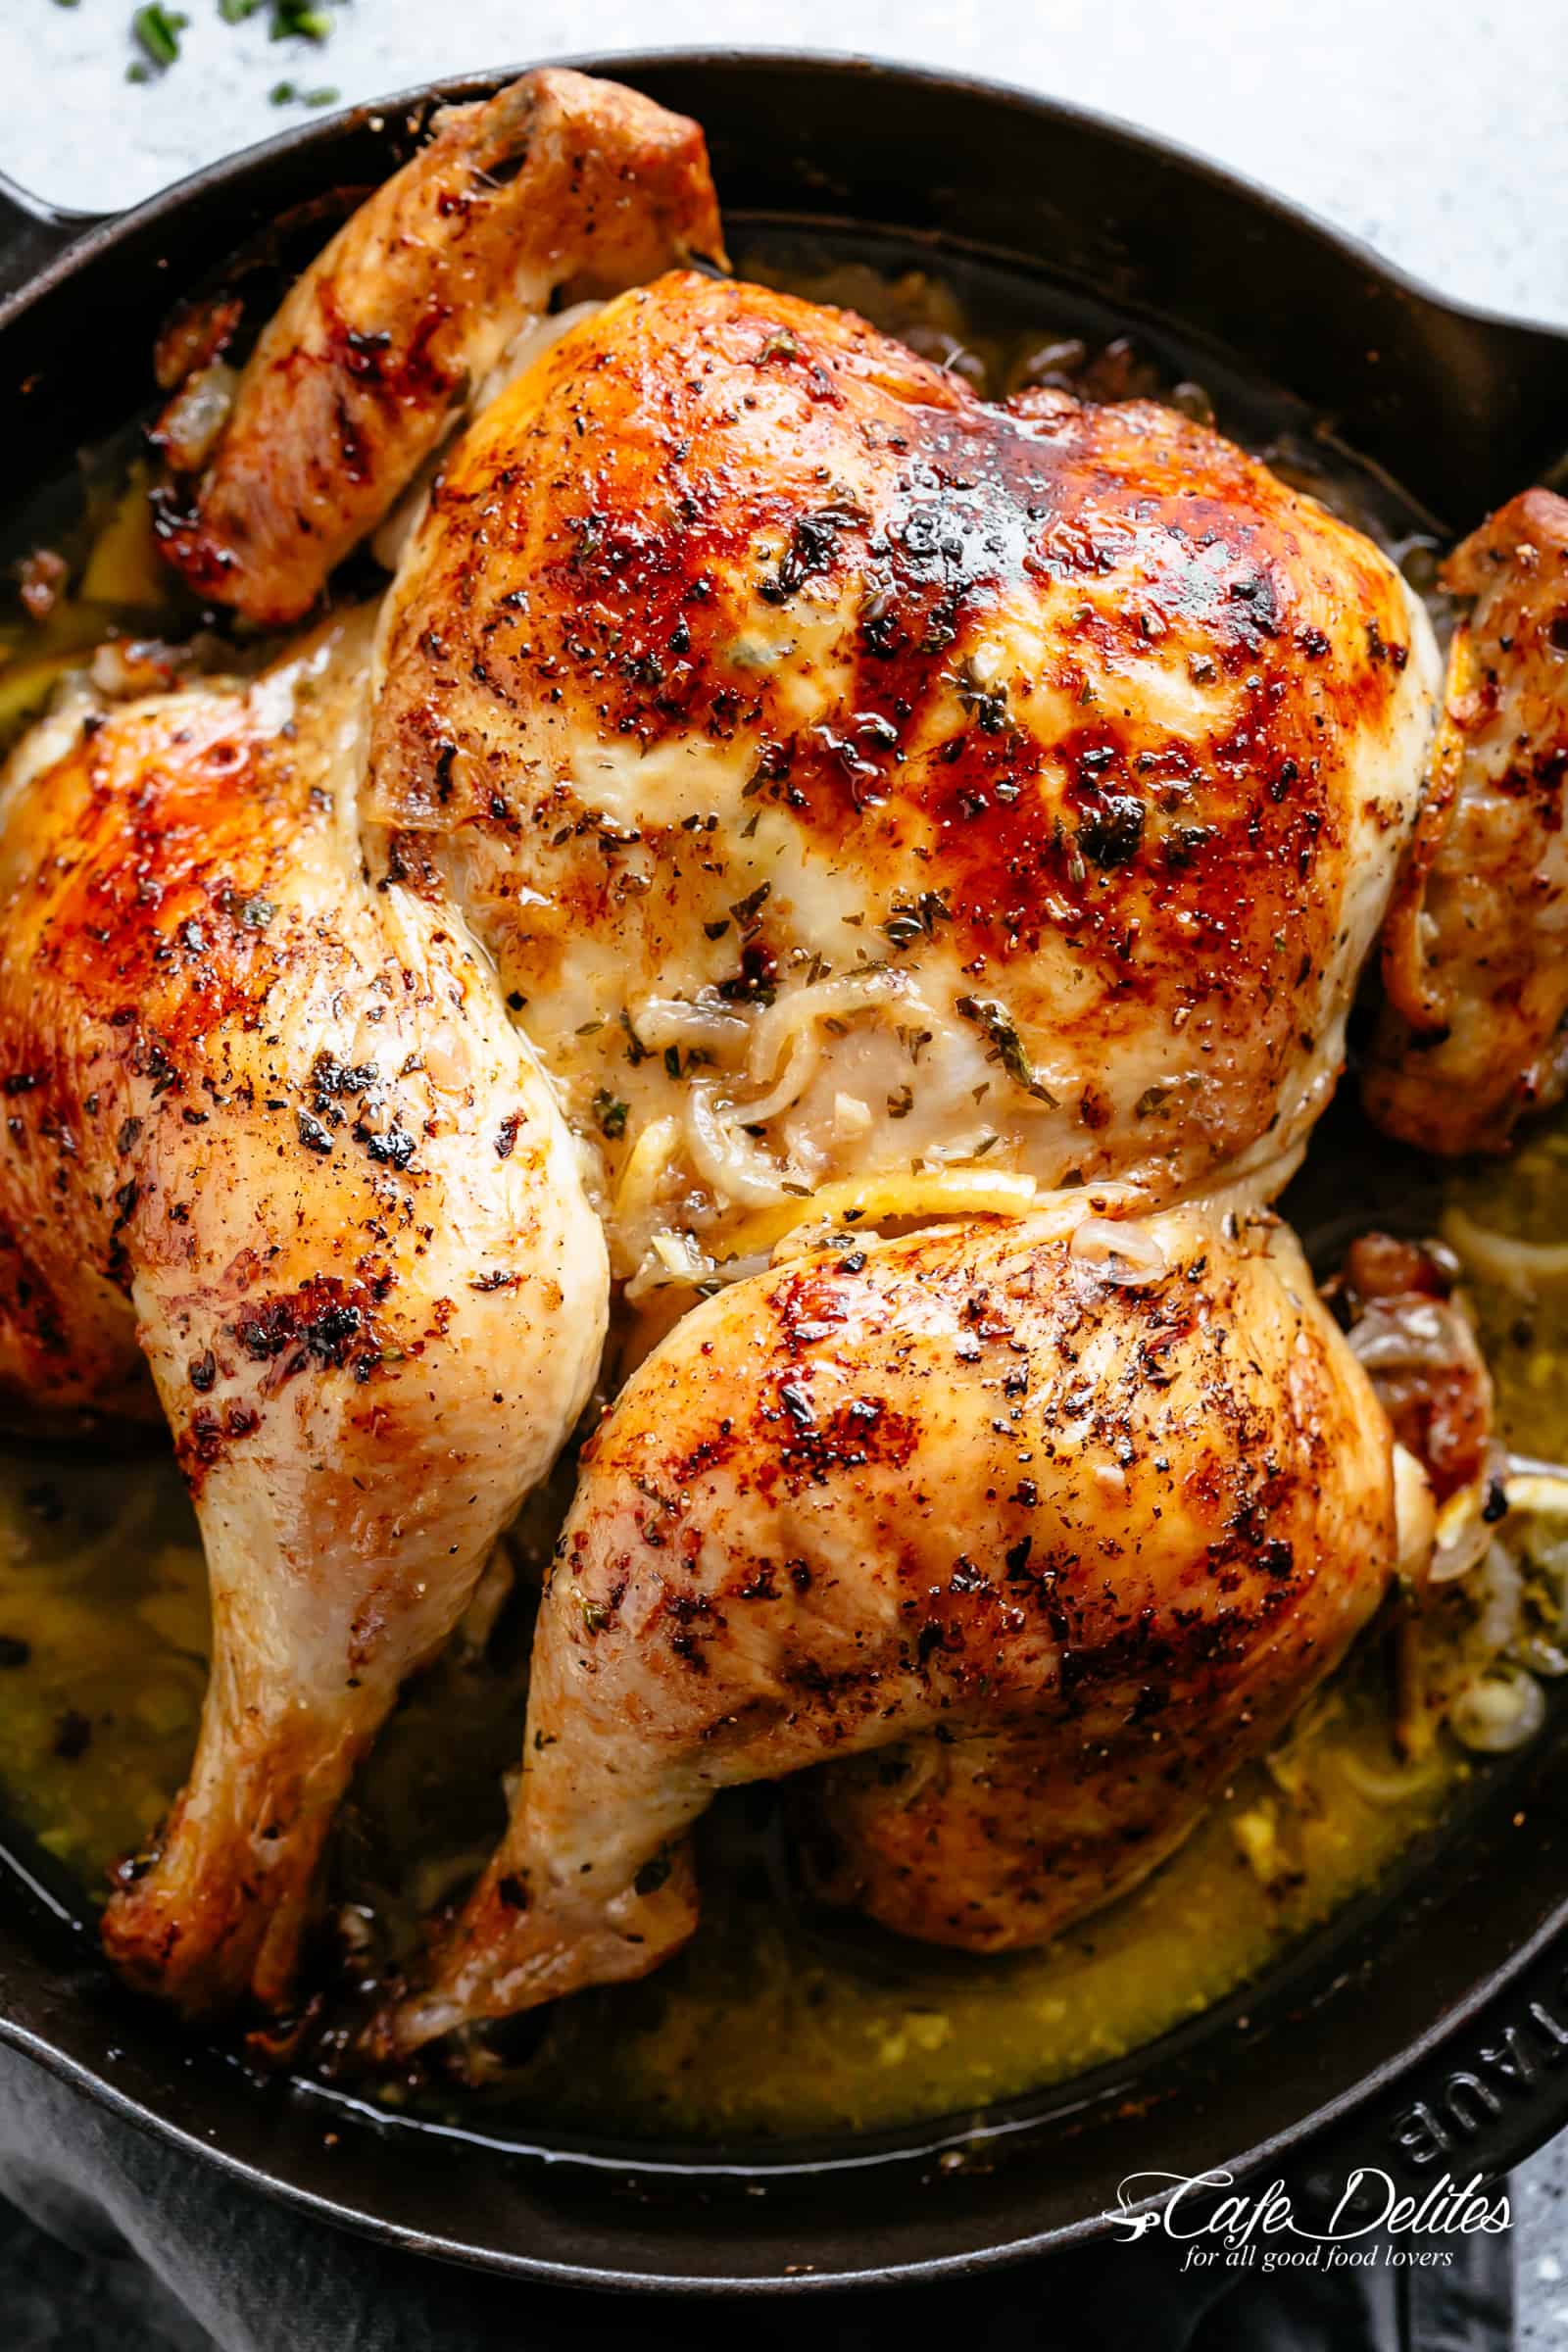 Tender and juicy Lemon Garlic Roast Chicken with crispy, rich and flavourful skin, so much flavour and easy to find ingredients! Garlic, onions, lemons, olive oil, fresh herbs and a splash of white wine (optional) make this one amazing roast chicken recipe! You'll be so surprised at how moist the meat is! | cafedelites.com